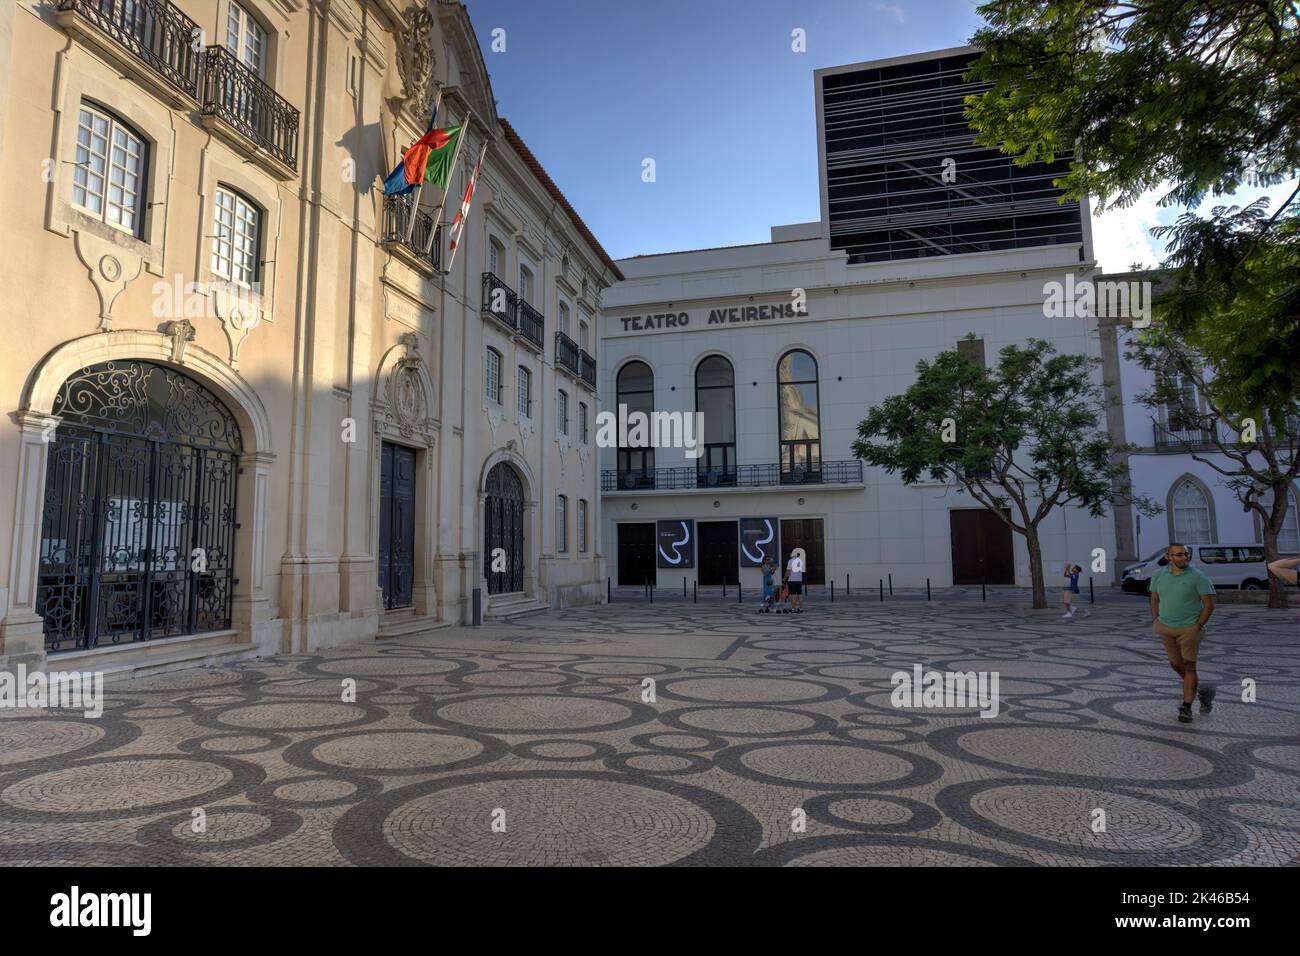 Aveiro, Portugal - August 14, 2022: Theater (Teatro) Aveirense located next to district council building with motion blurred pedestrians in foreground Stock Photo